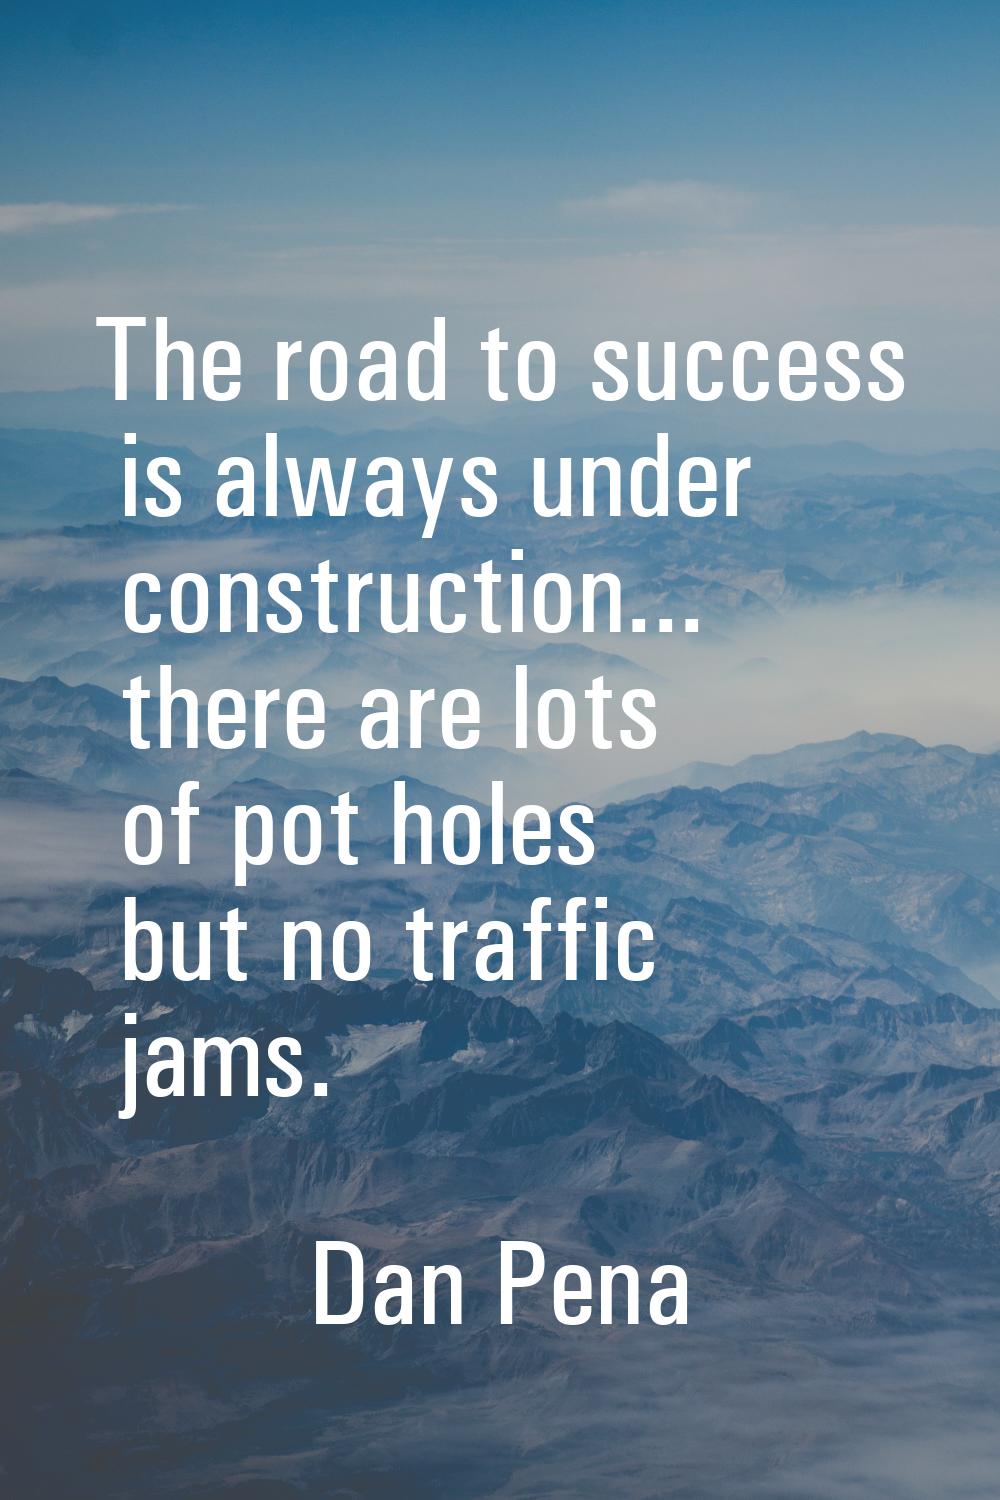 The road to success is always under construction... there are lots of pot holes but no traffic jams